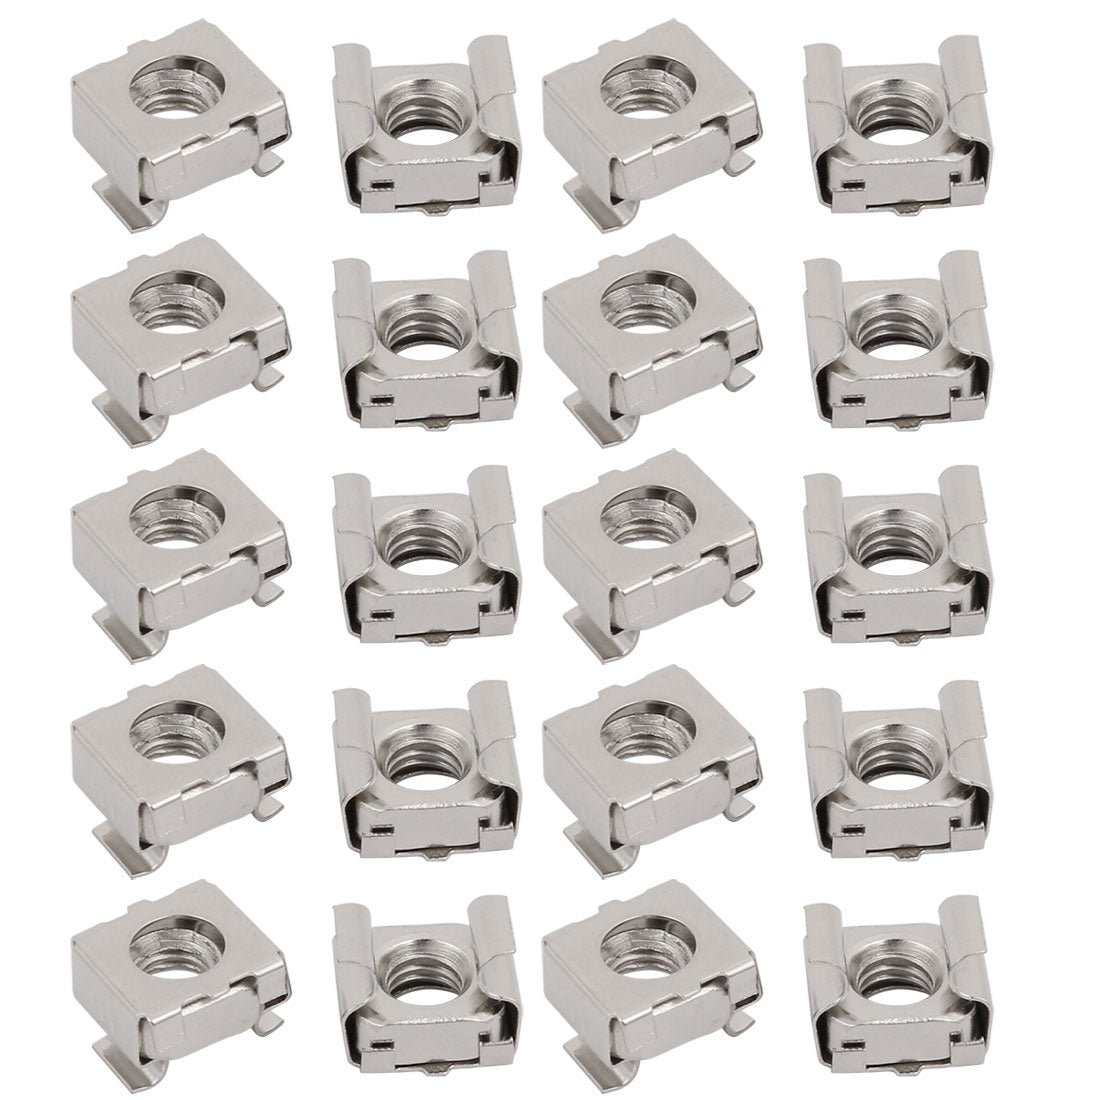 uxcell Uxcell 20pcs M6 Carbon Steel Nickle Plated Cage Nut for Server Shelf Cabinet